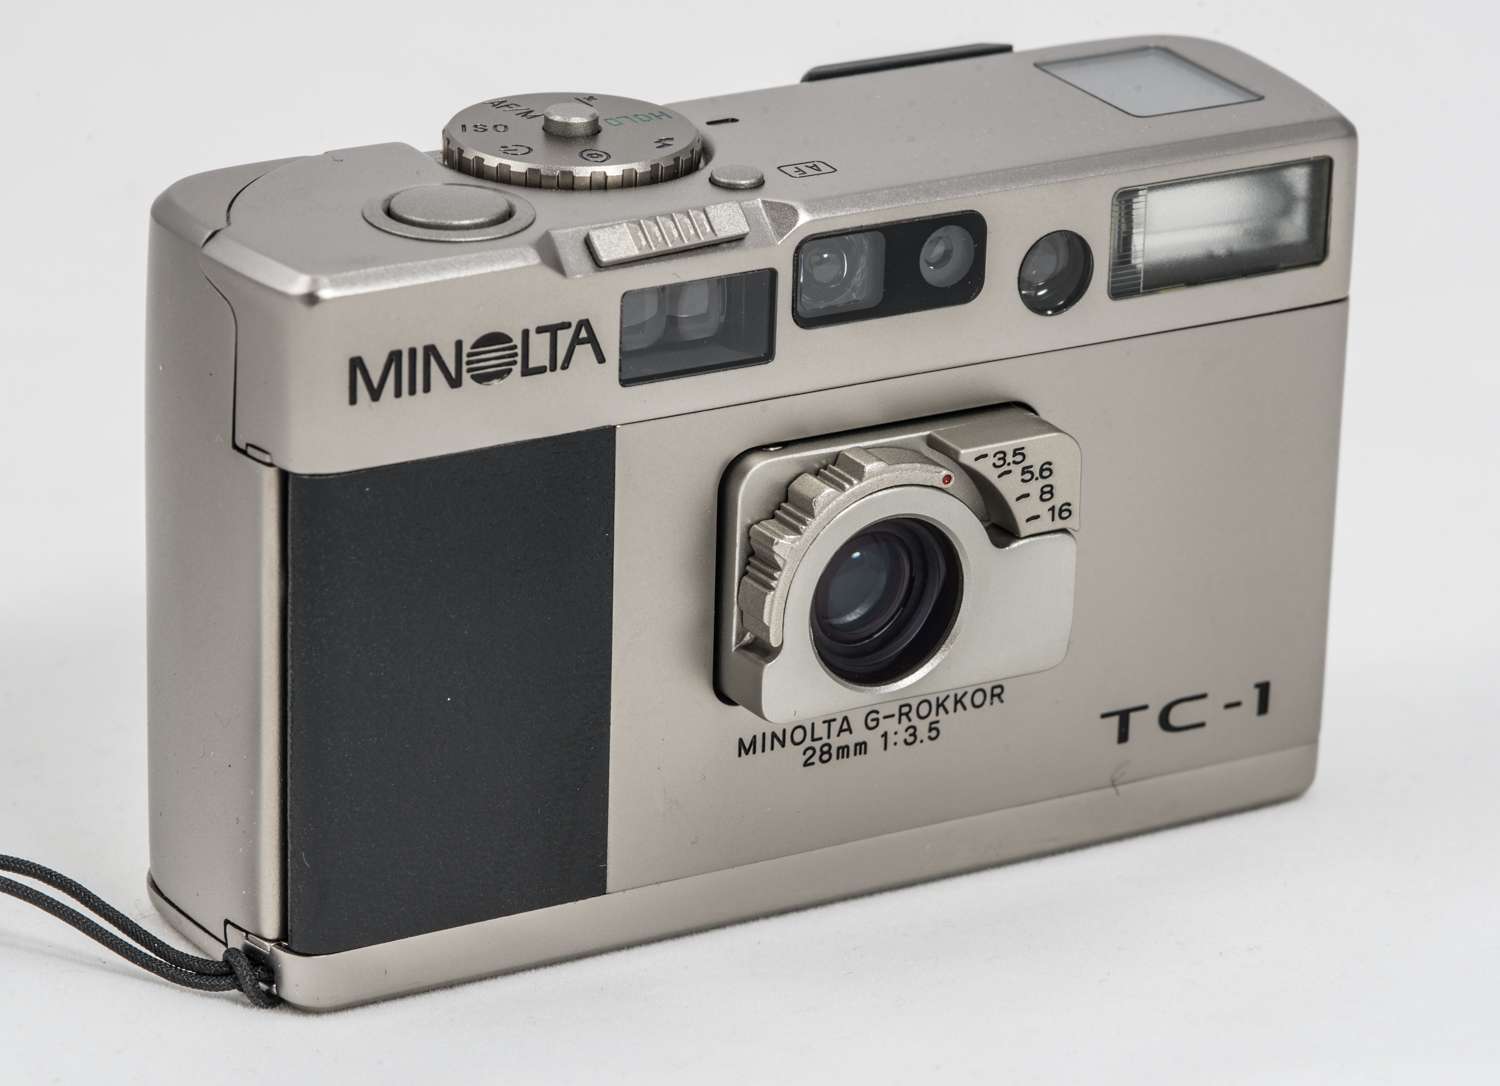 Rangefinder Chronicles: The Minolta TC-1 - A quirky, beautiful